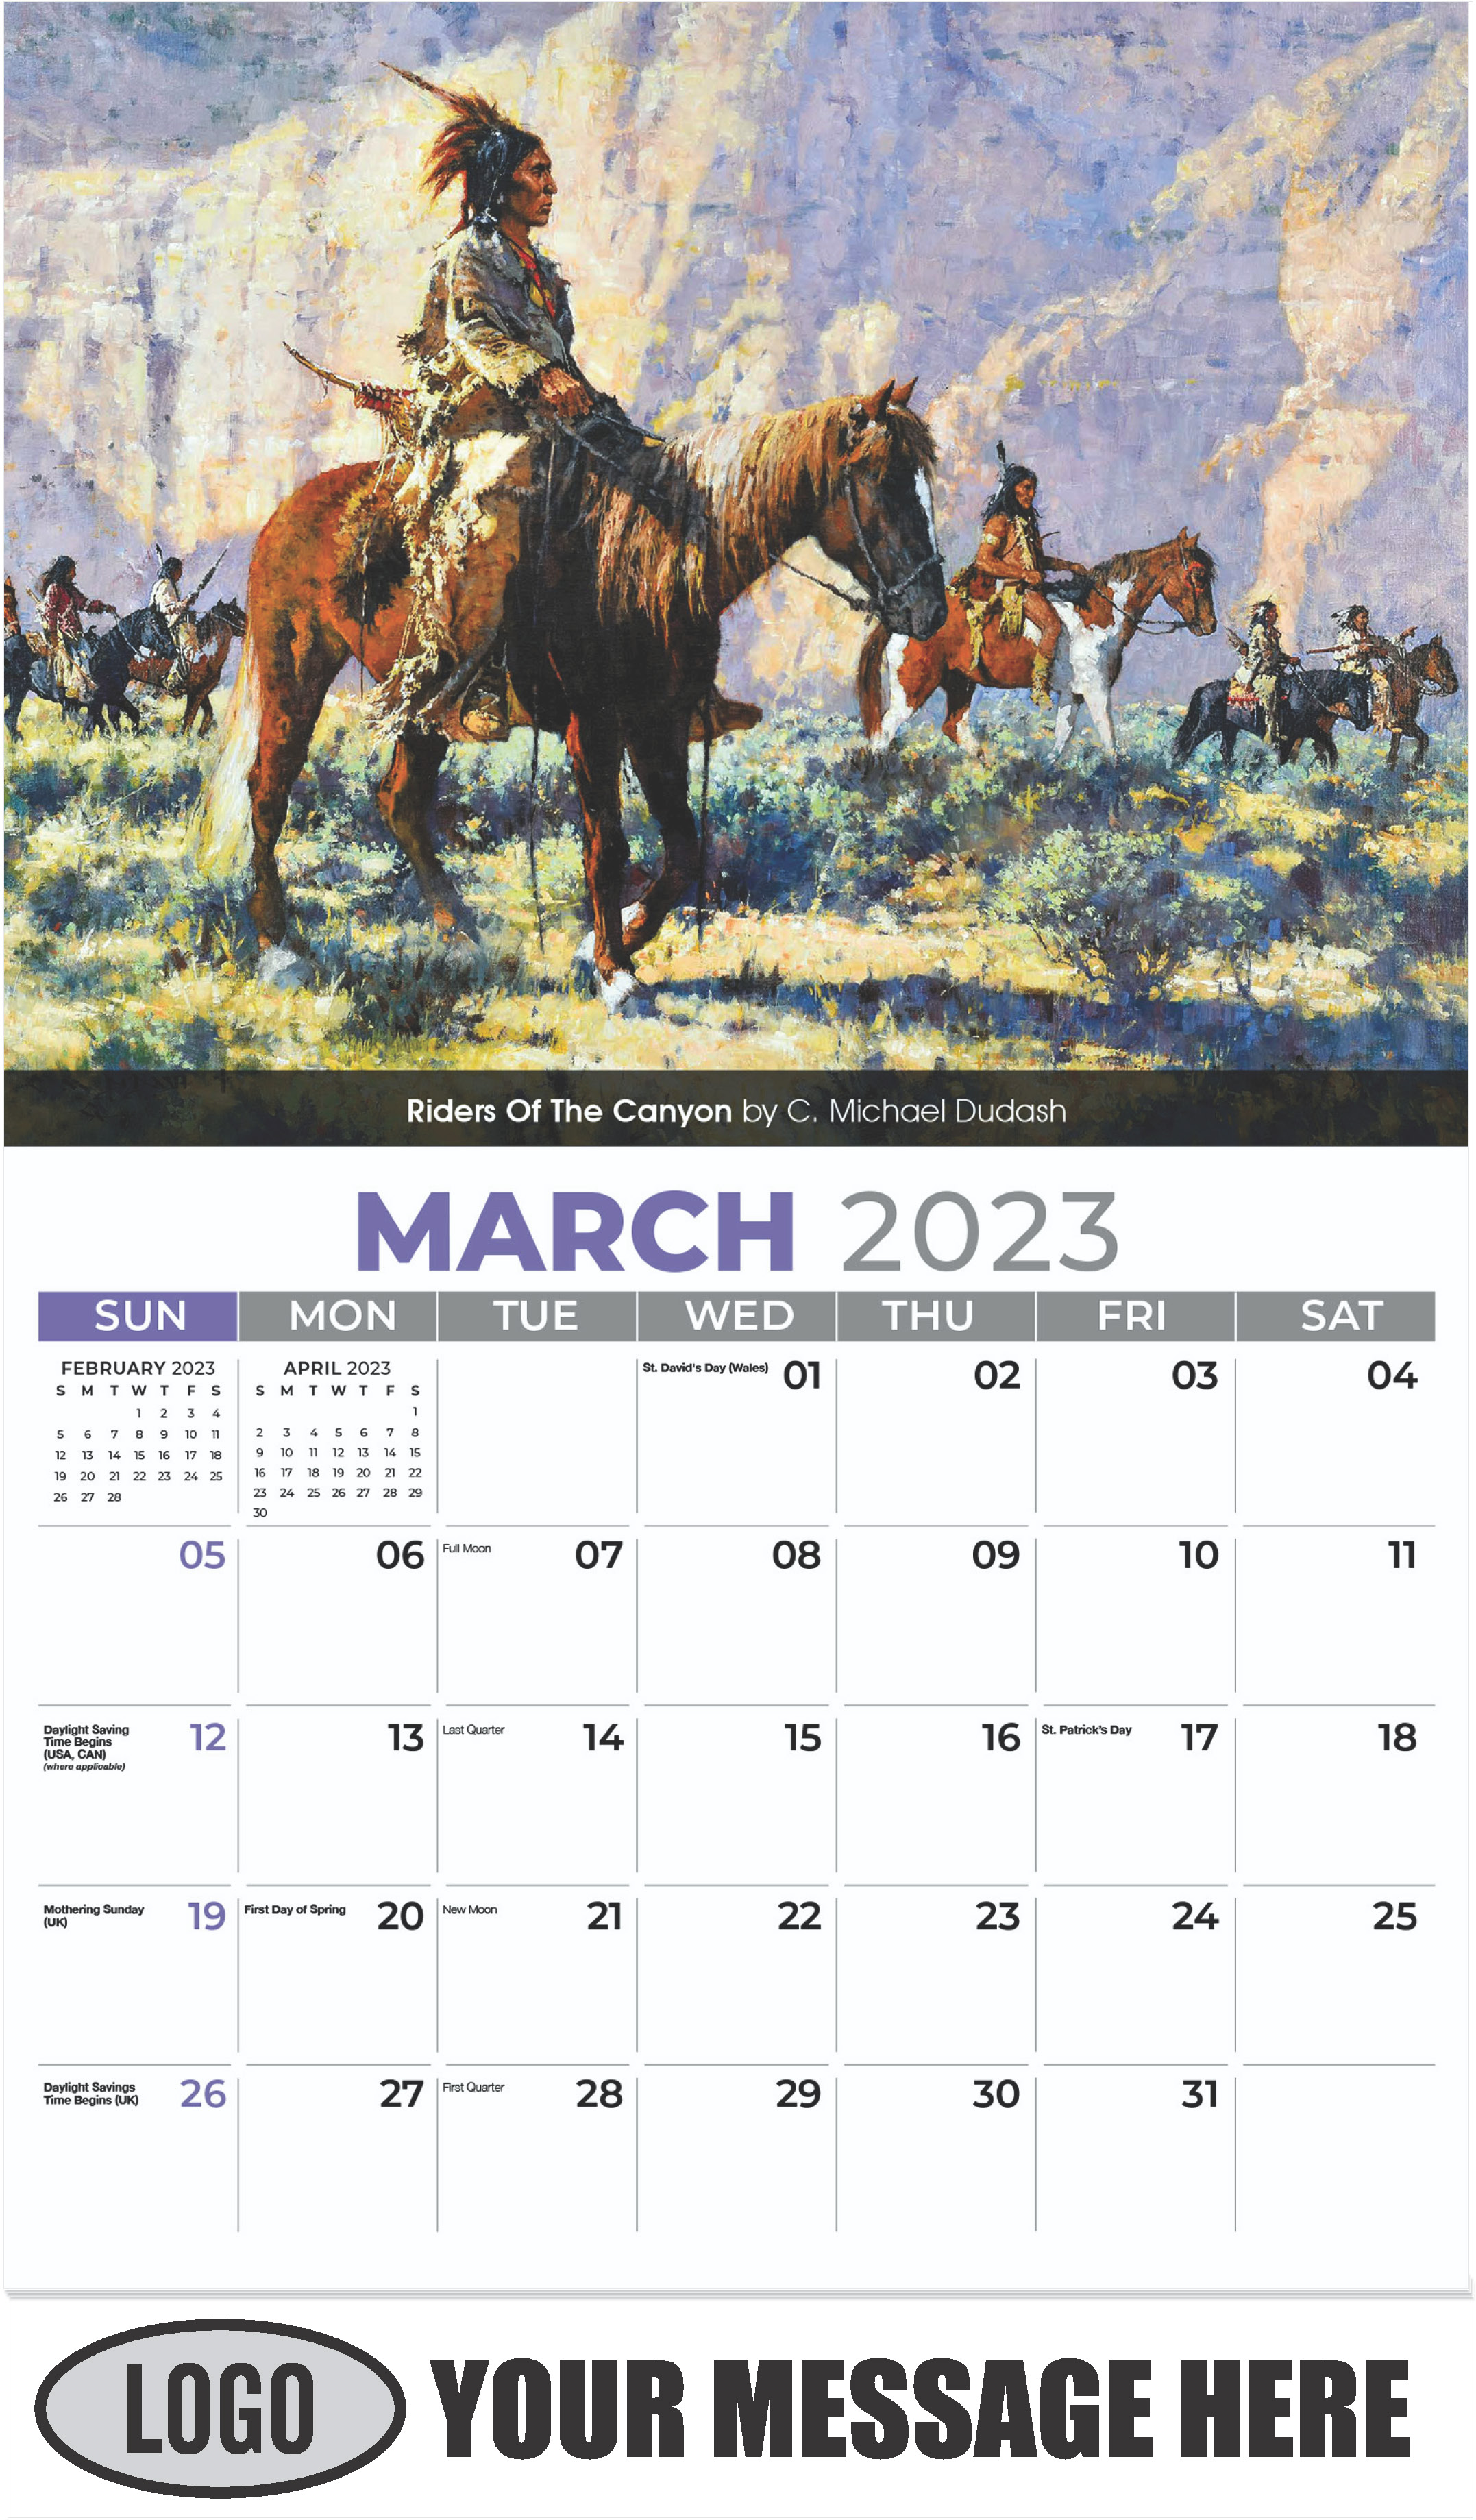 Riders Of The Canyon by C. Michael Dudash - March - Spirit of the West 2023 Promotional Calendar